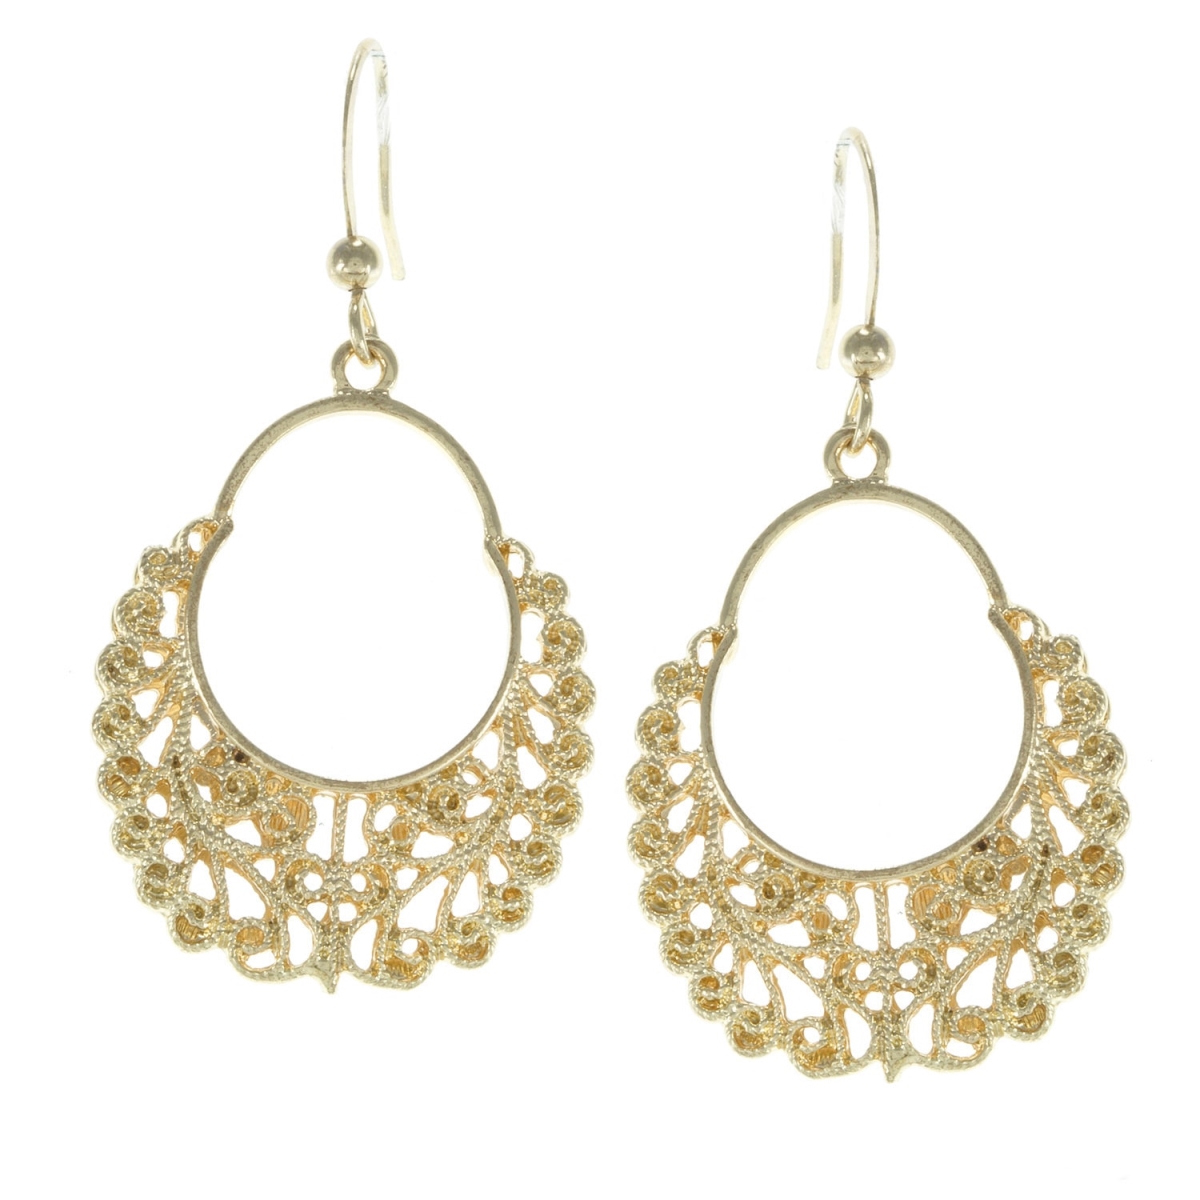 Picture of Alexa Starr 5742-EP-Gold Filigree Drop Earrings